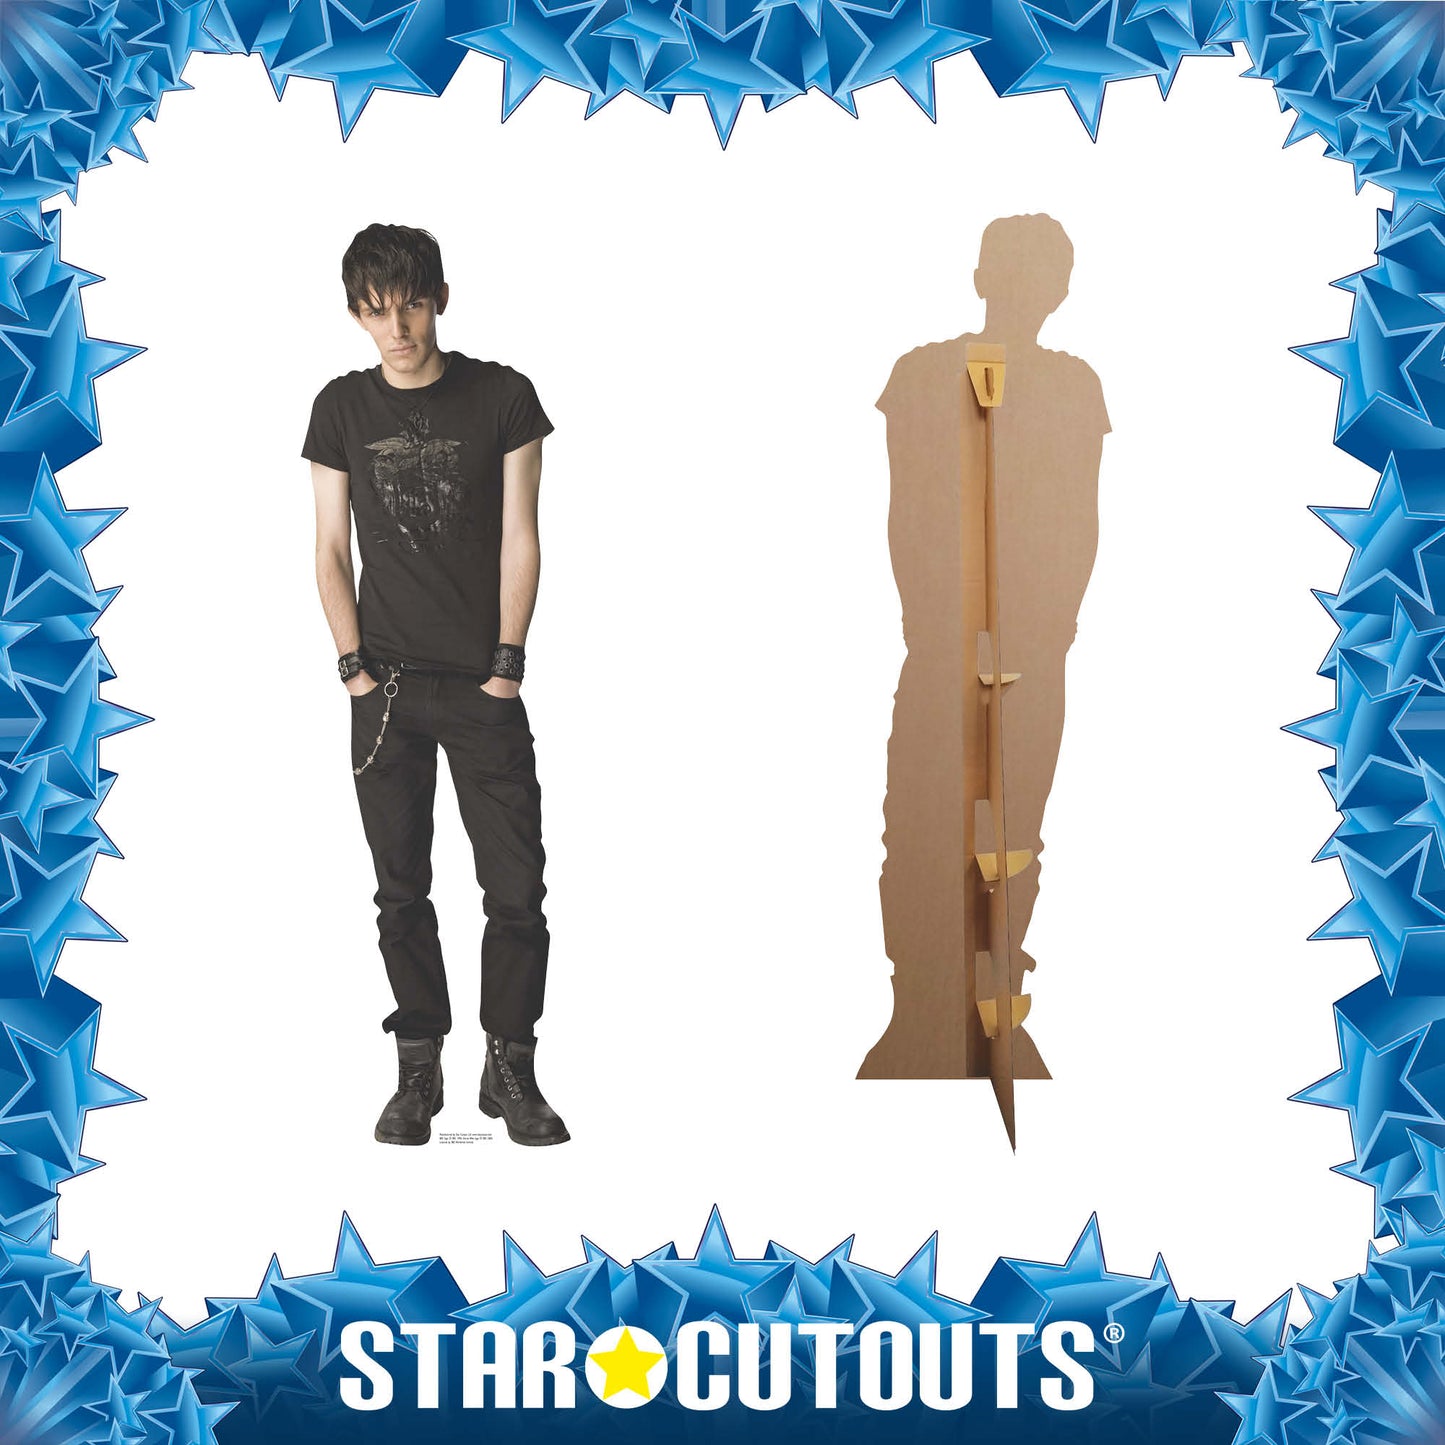 Jethro - Dr Who Cardboard Cut Out Height 185cm - Star Cutouts